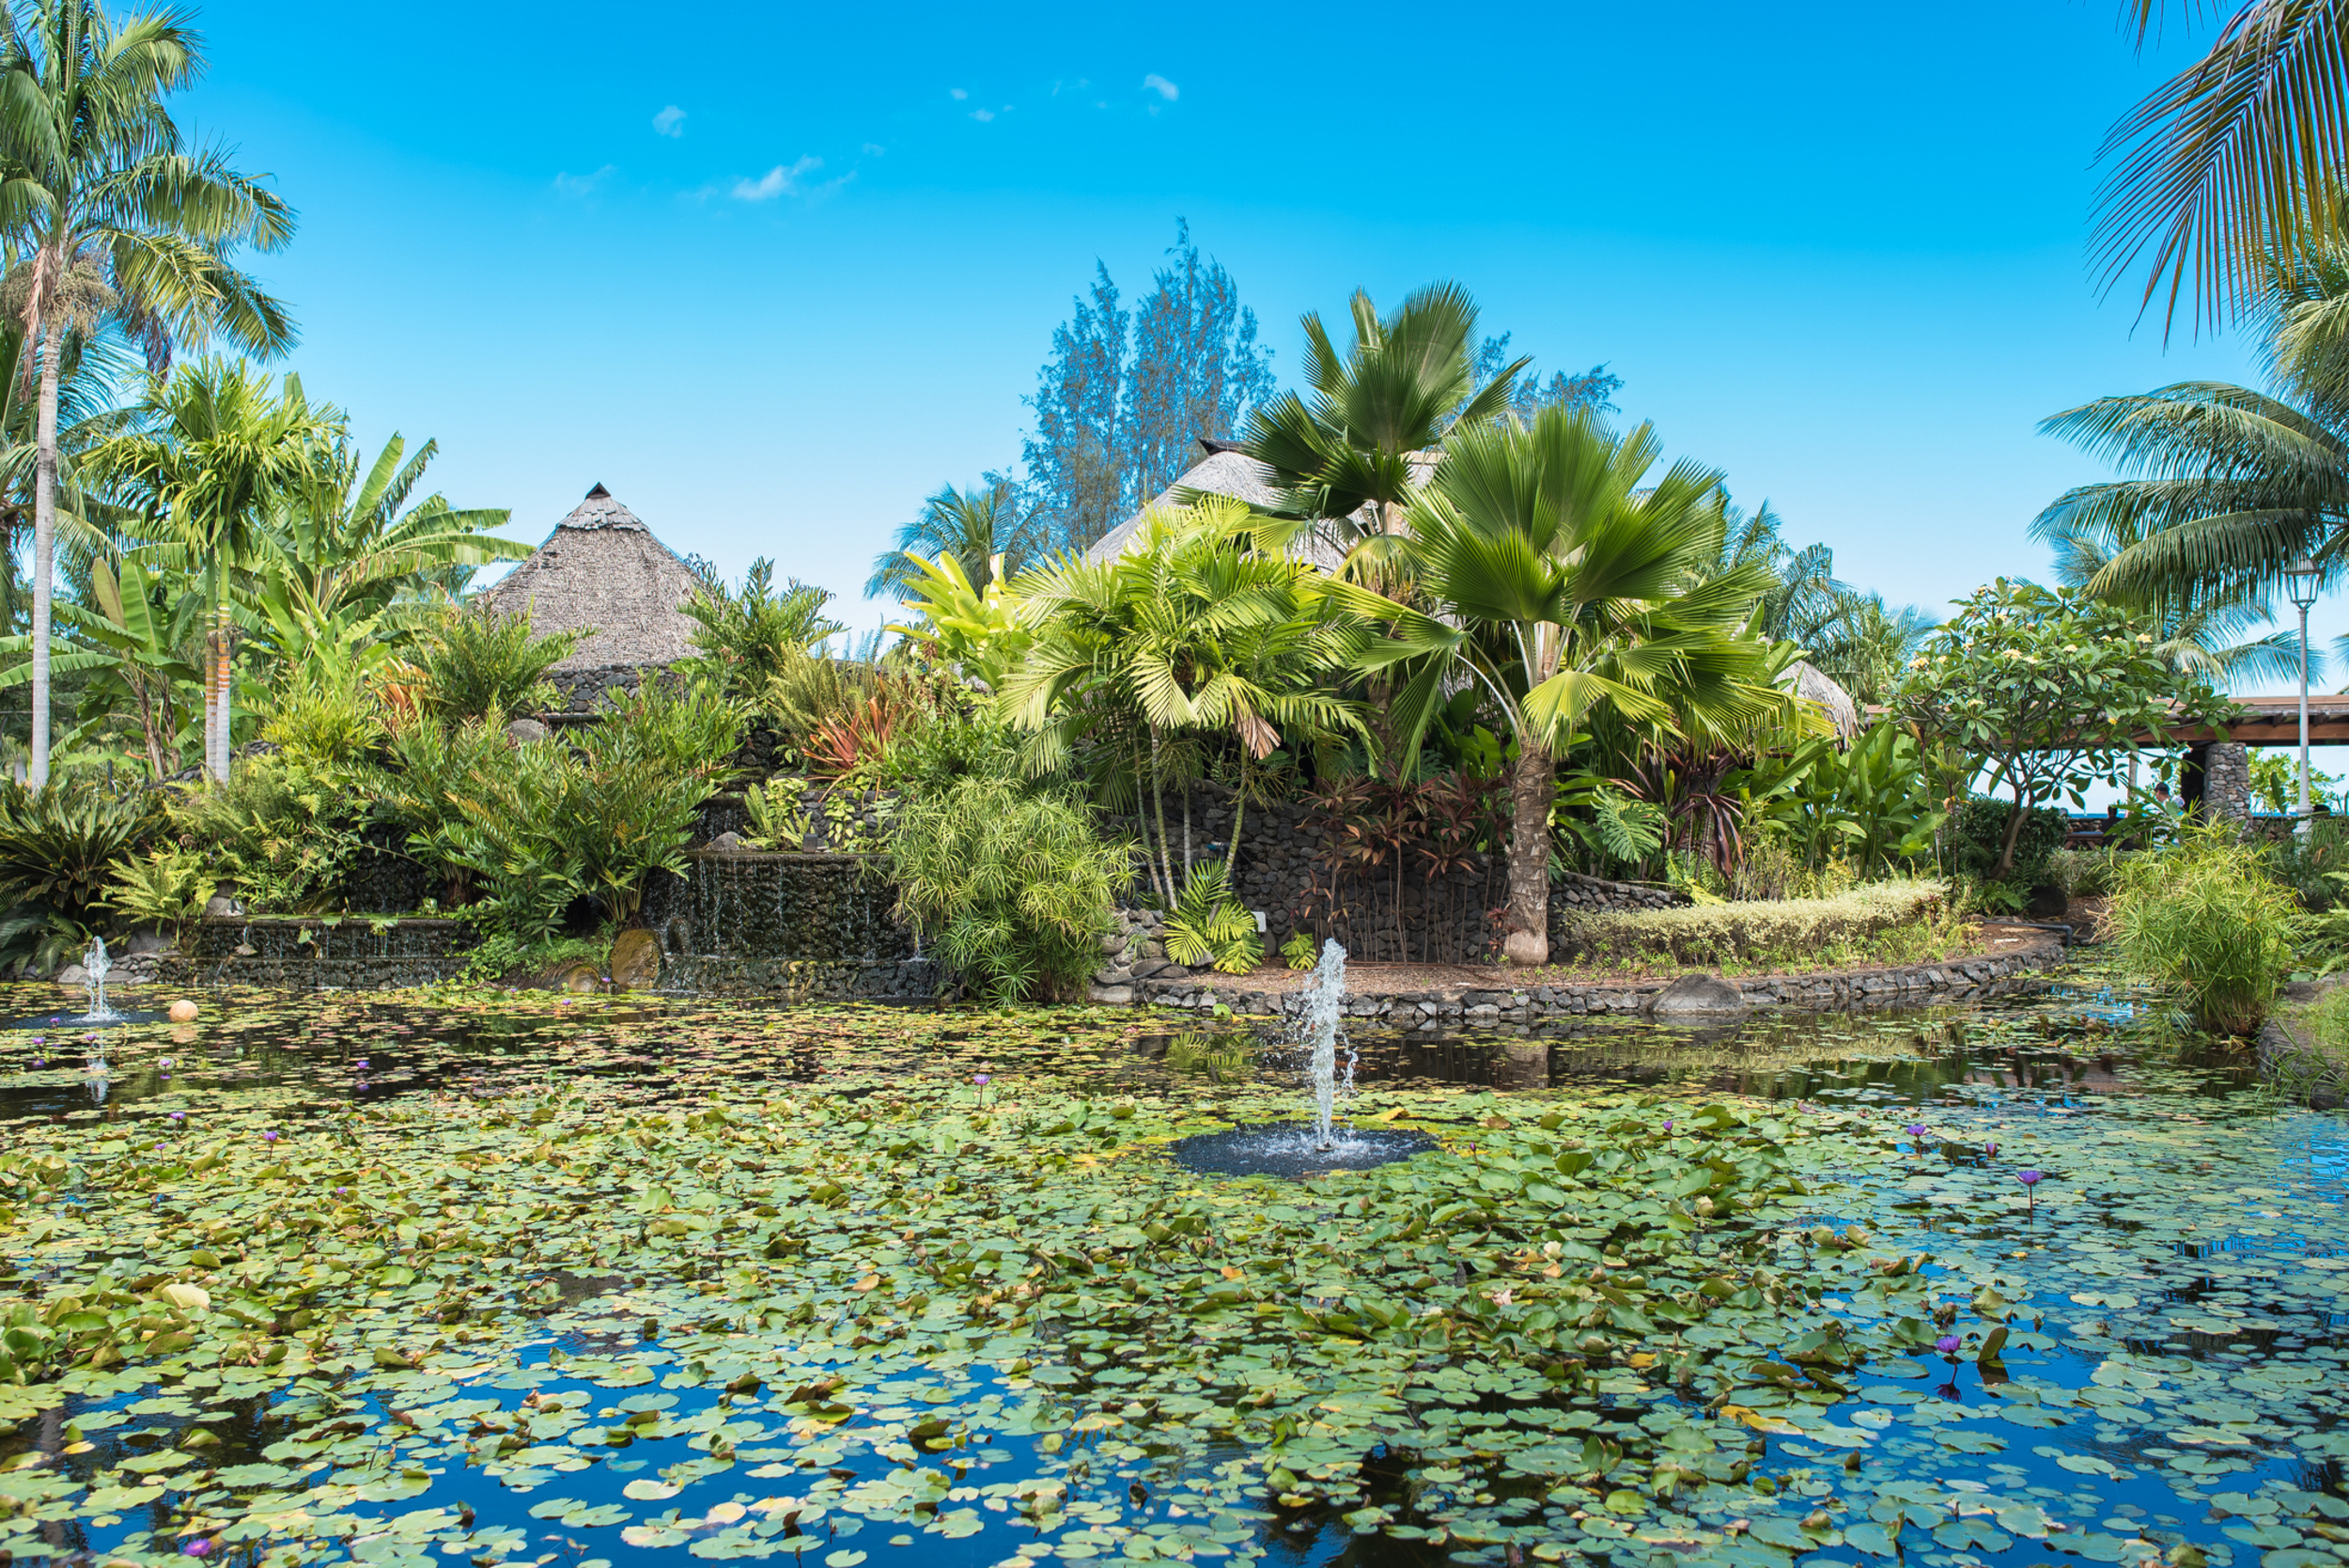 <p>Tahiti is full of gardens, but the standout is Pa'ofa'i's well-manicured ponds. Having been a staple of local hangouts, the garden is now more of a tourist activity, but who can blame tourists for showing up to such a lyrical place?</p><p>You may also like: <a href='https://www.yardbarker.com/lifestyle/articles/15_easy_ways_to_drink_more_water/s1__38412713'>15 easy ways to drink more water</a></p>